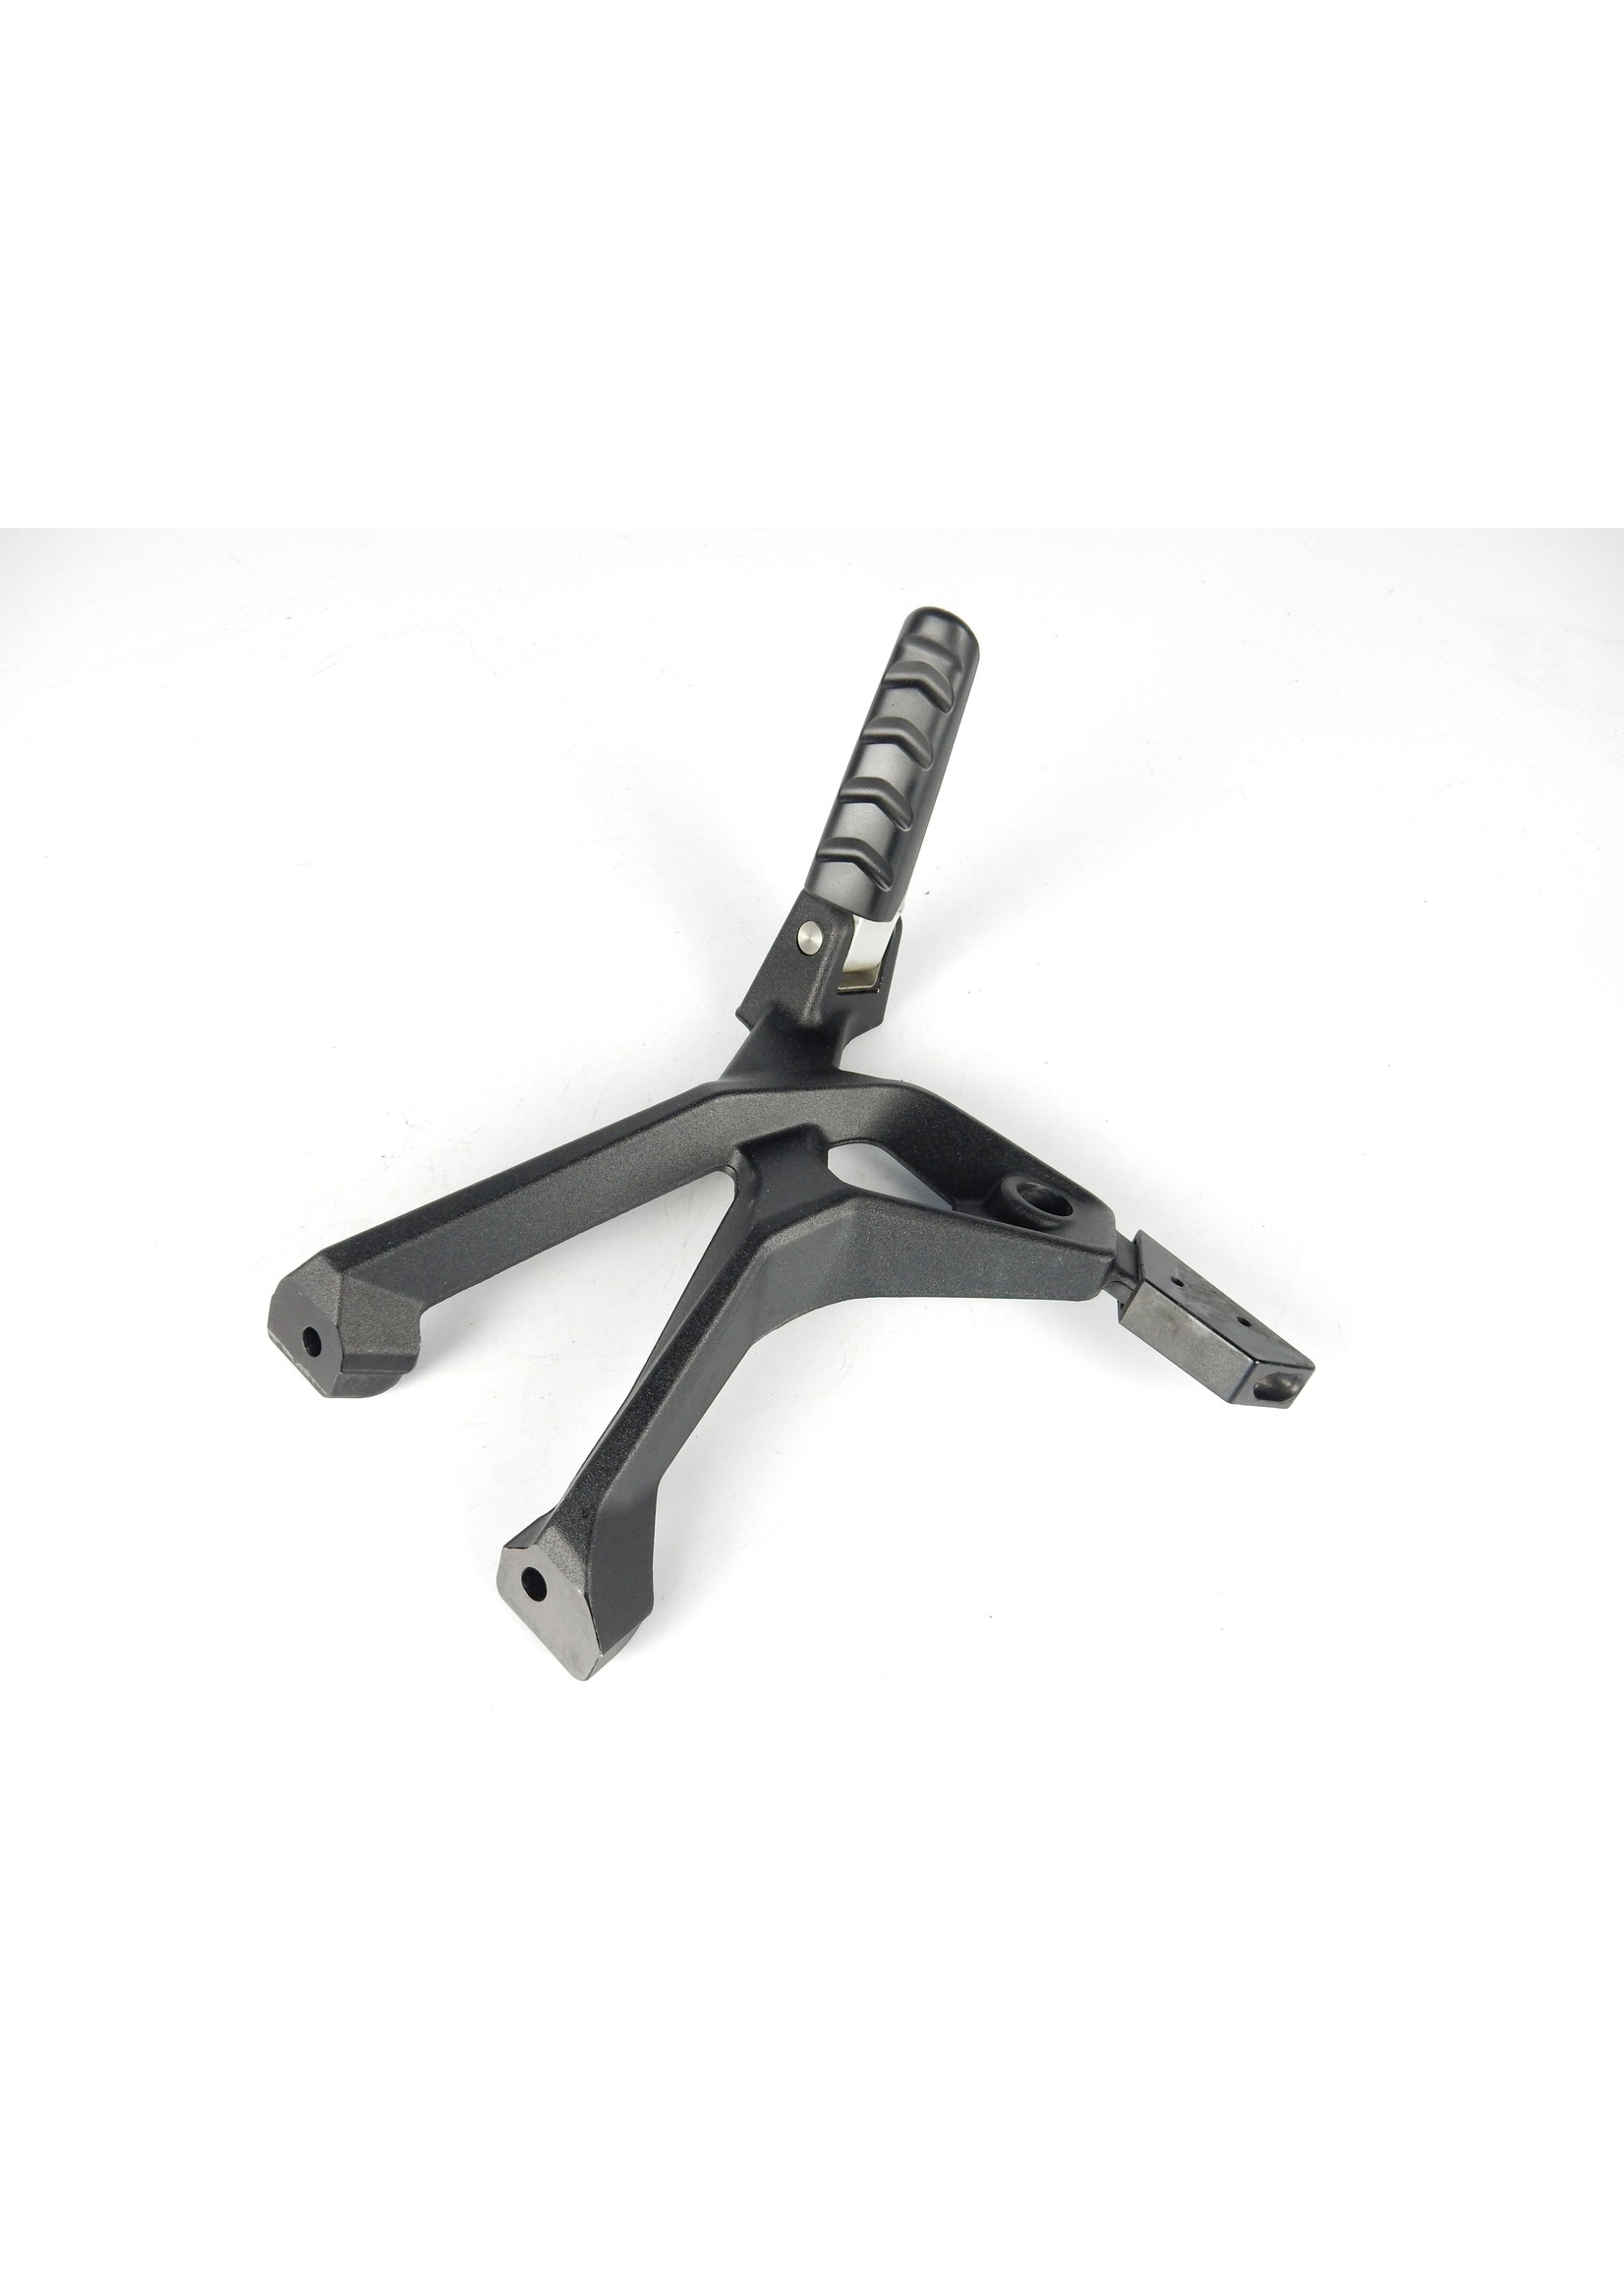 BMW BMW S 1000 XR Right rear footrest holder / Footrest, right, w/rubber footr. element / 46718404602 / 46717728904